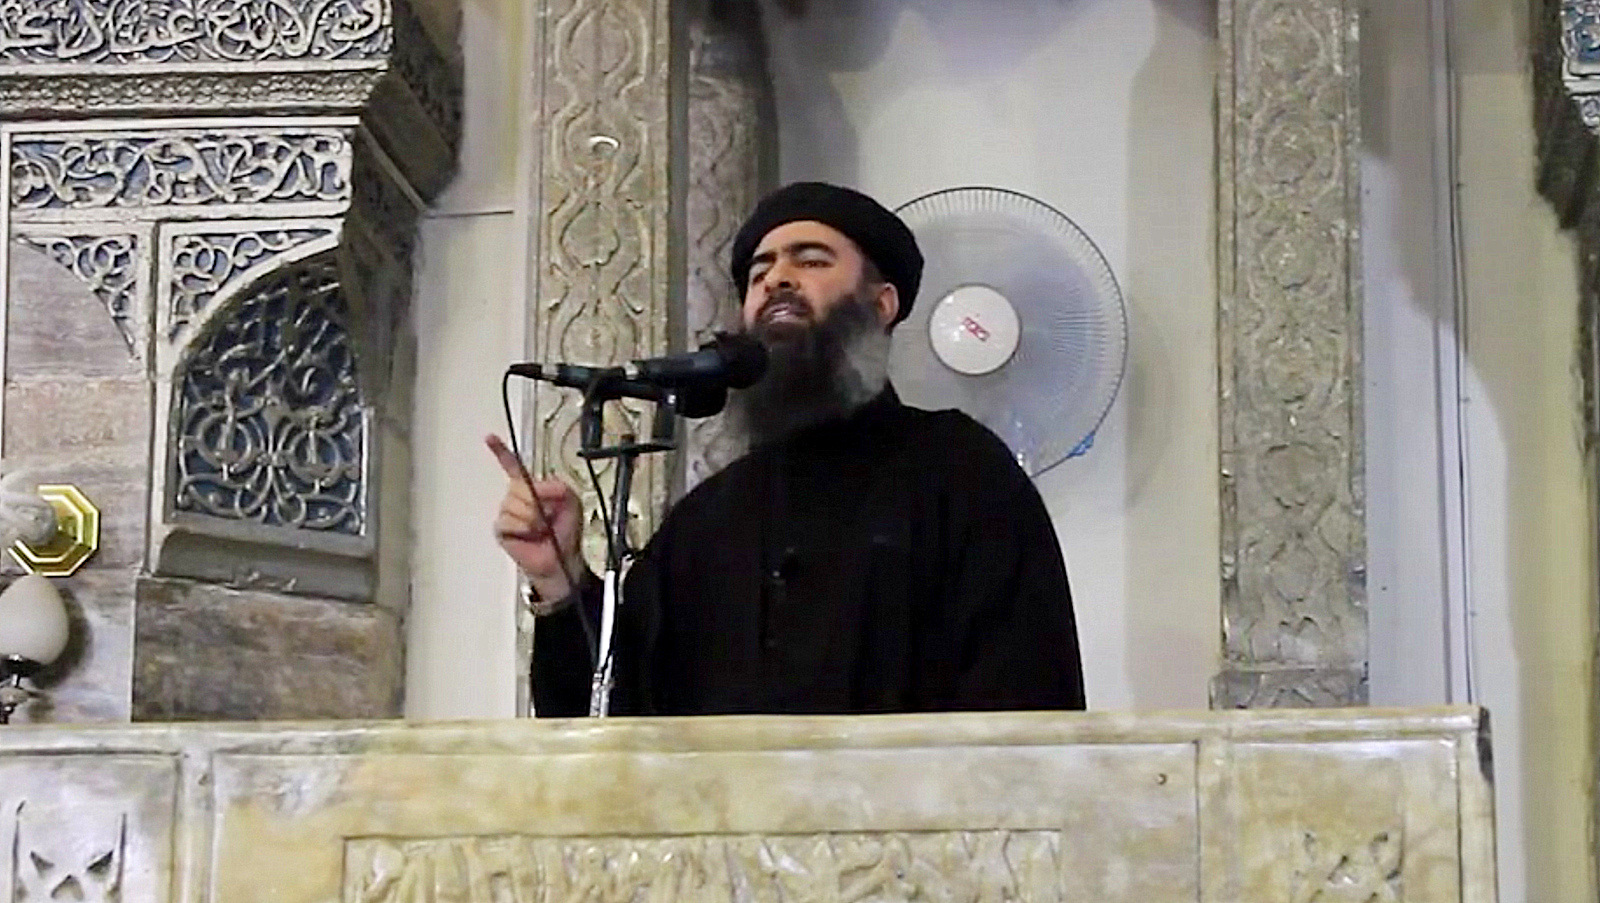 The leader of the Islamic State group, Abu Bakr al-Baghdadi delivering a speech an ISIS overrun mosque in what would be a rare - if not the first - public appearance by the shadowy militant. 